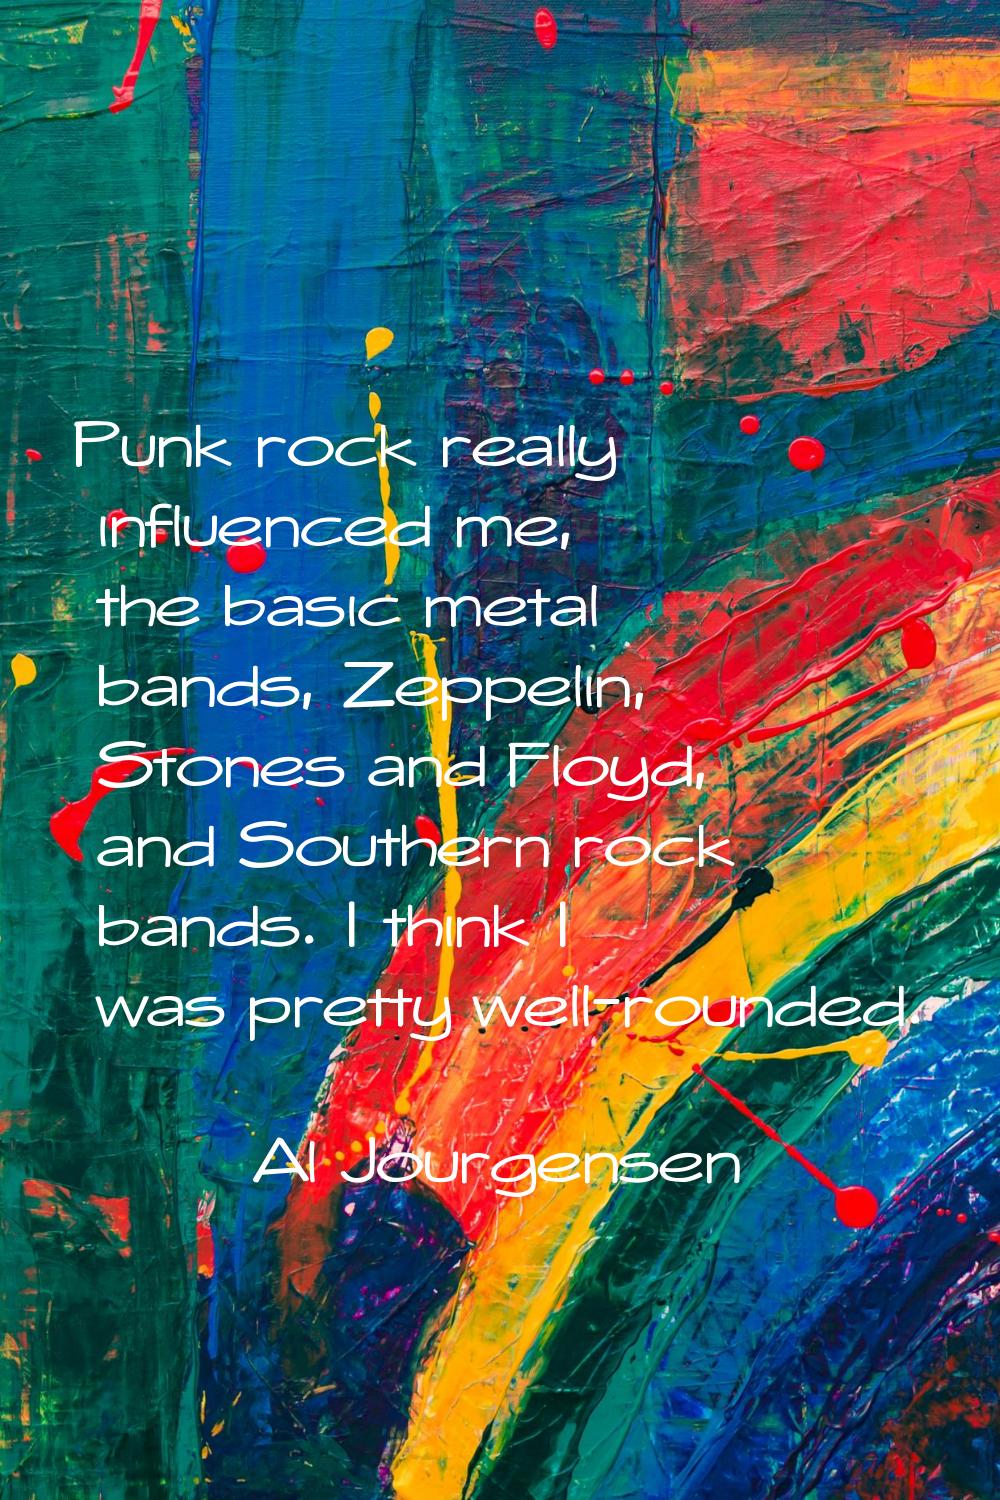 Punk rock really influenced me, the basic metal bands, Zeppelin, Stones and Floyd, and Southern roc